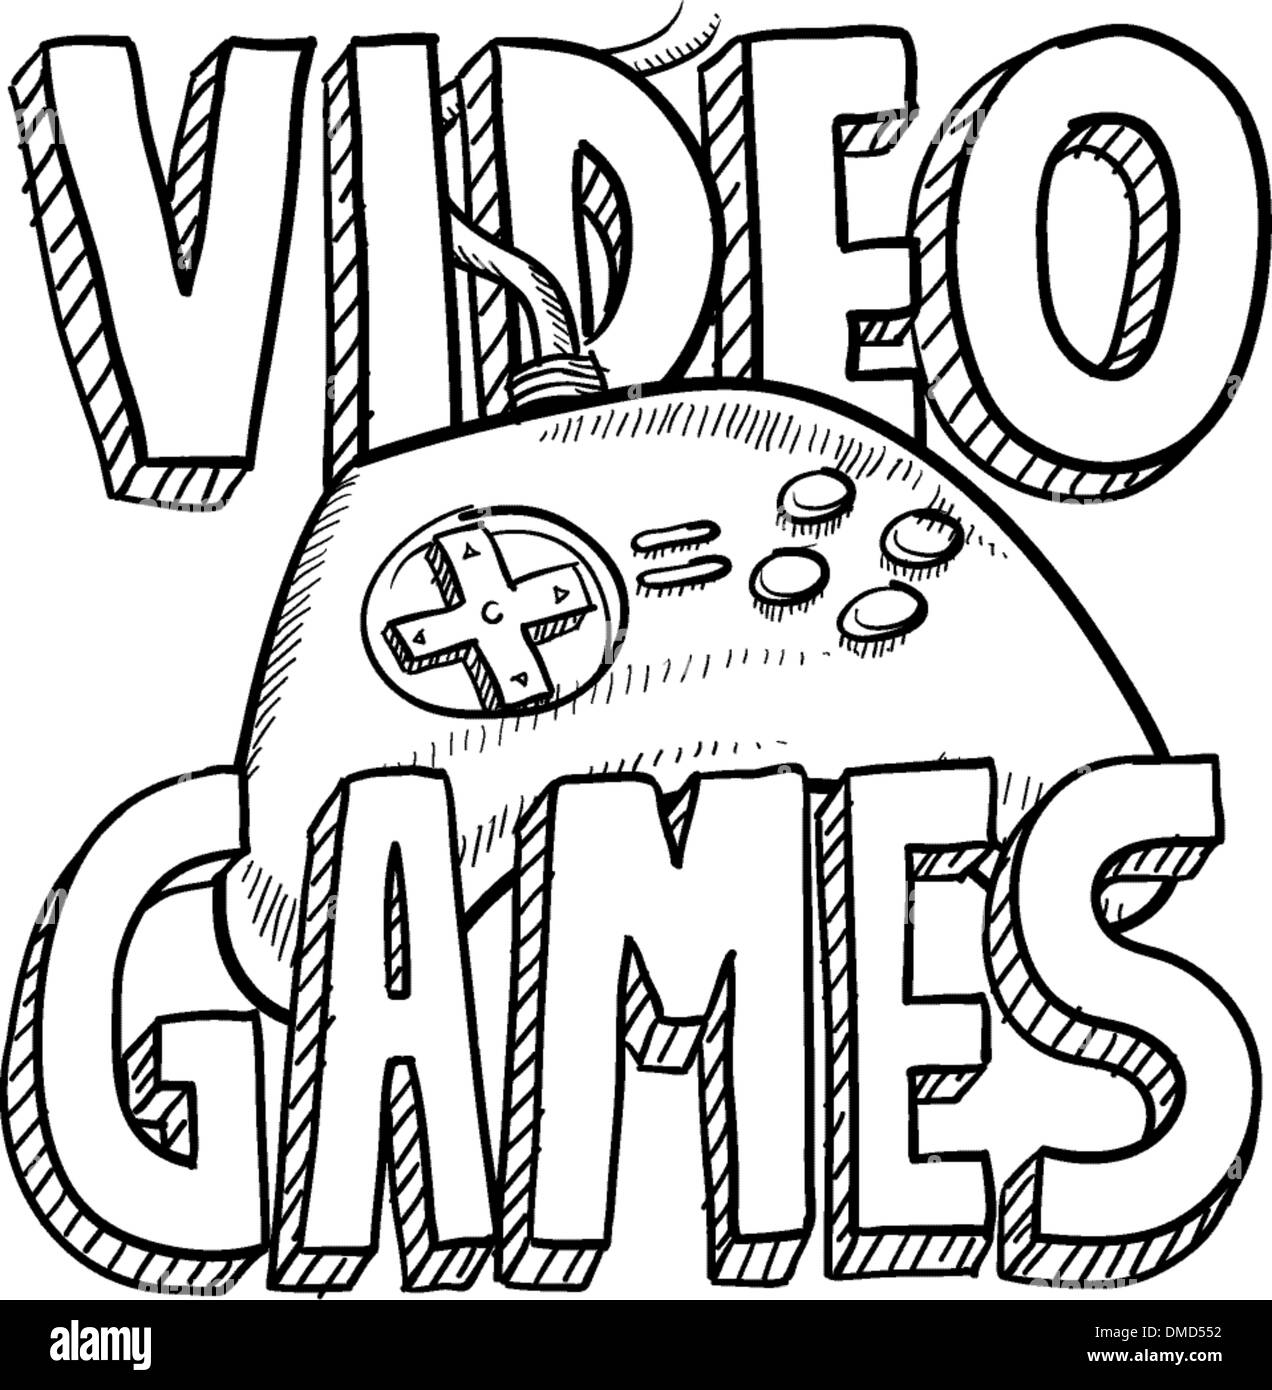 Video games black and white stock photos images